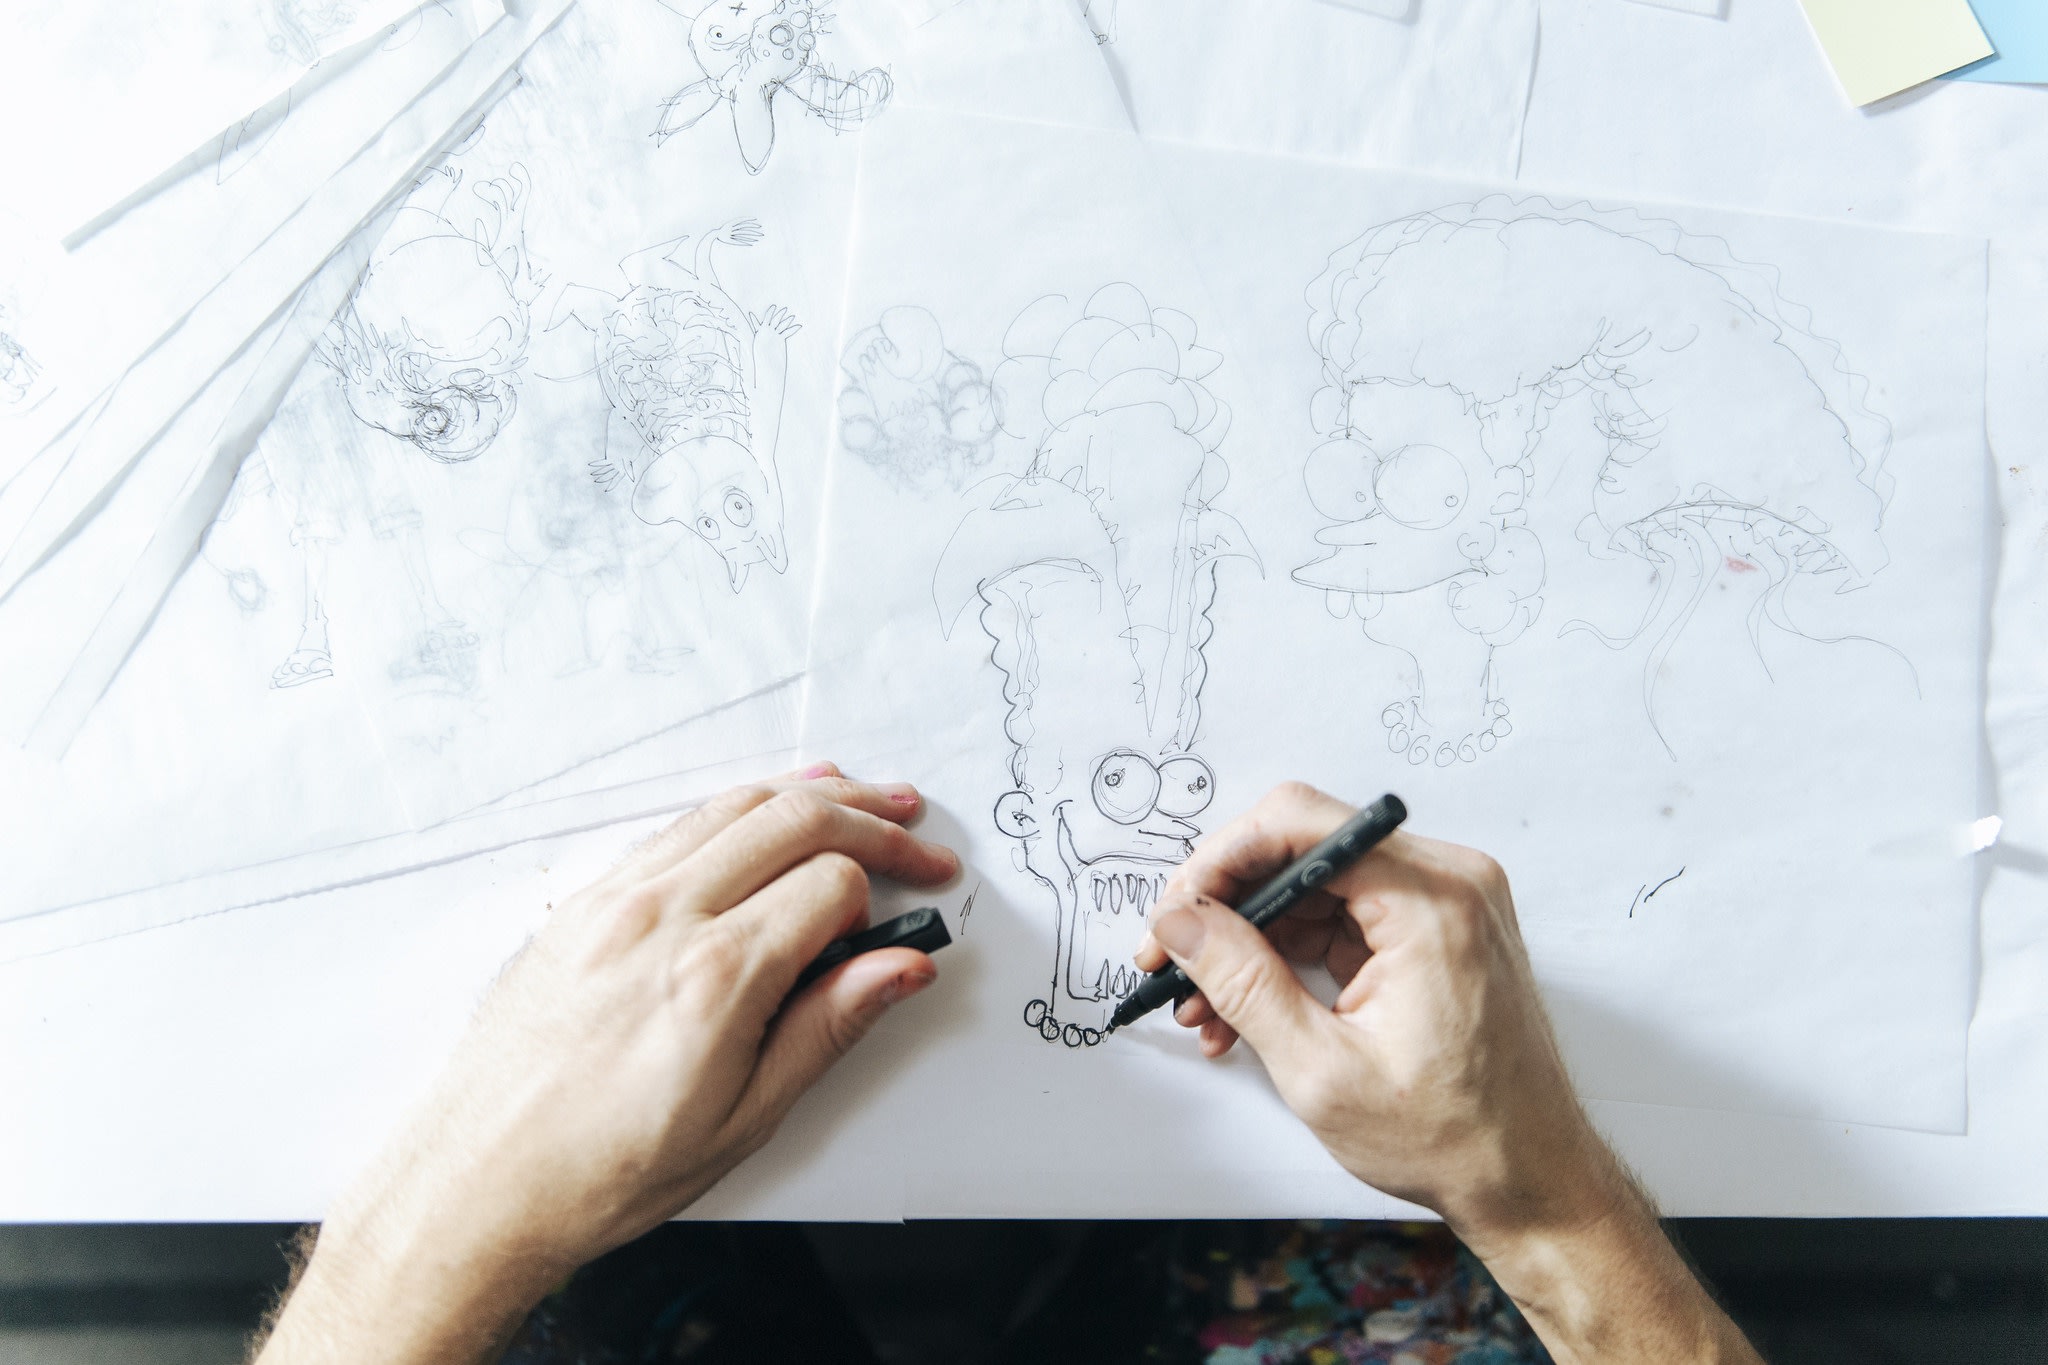 Studio visit with artist Alex Pardee, close up of the artist drawing.